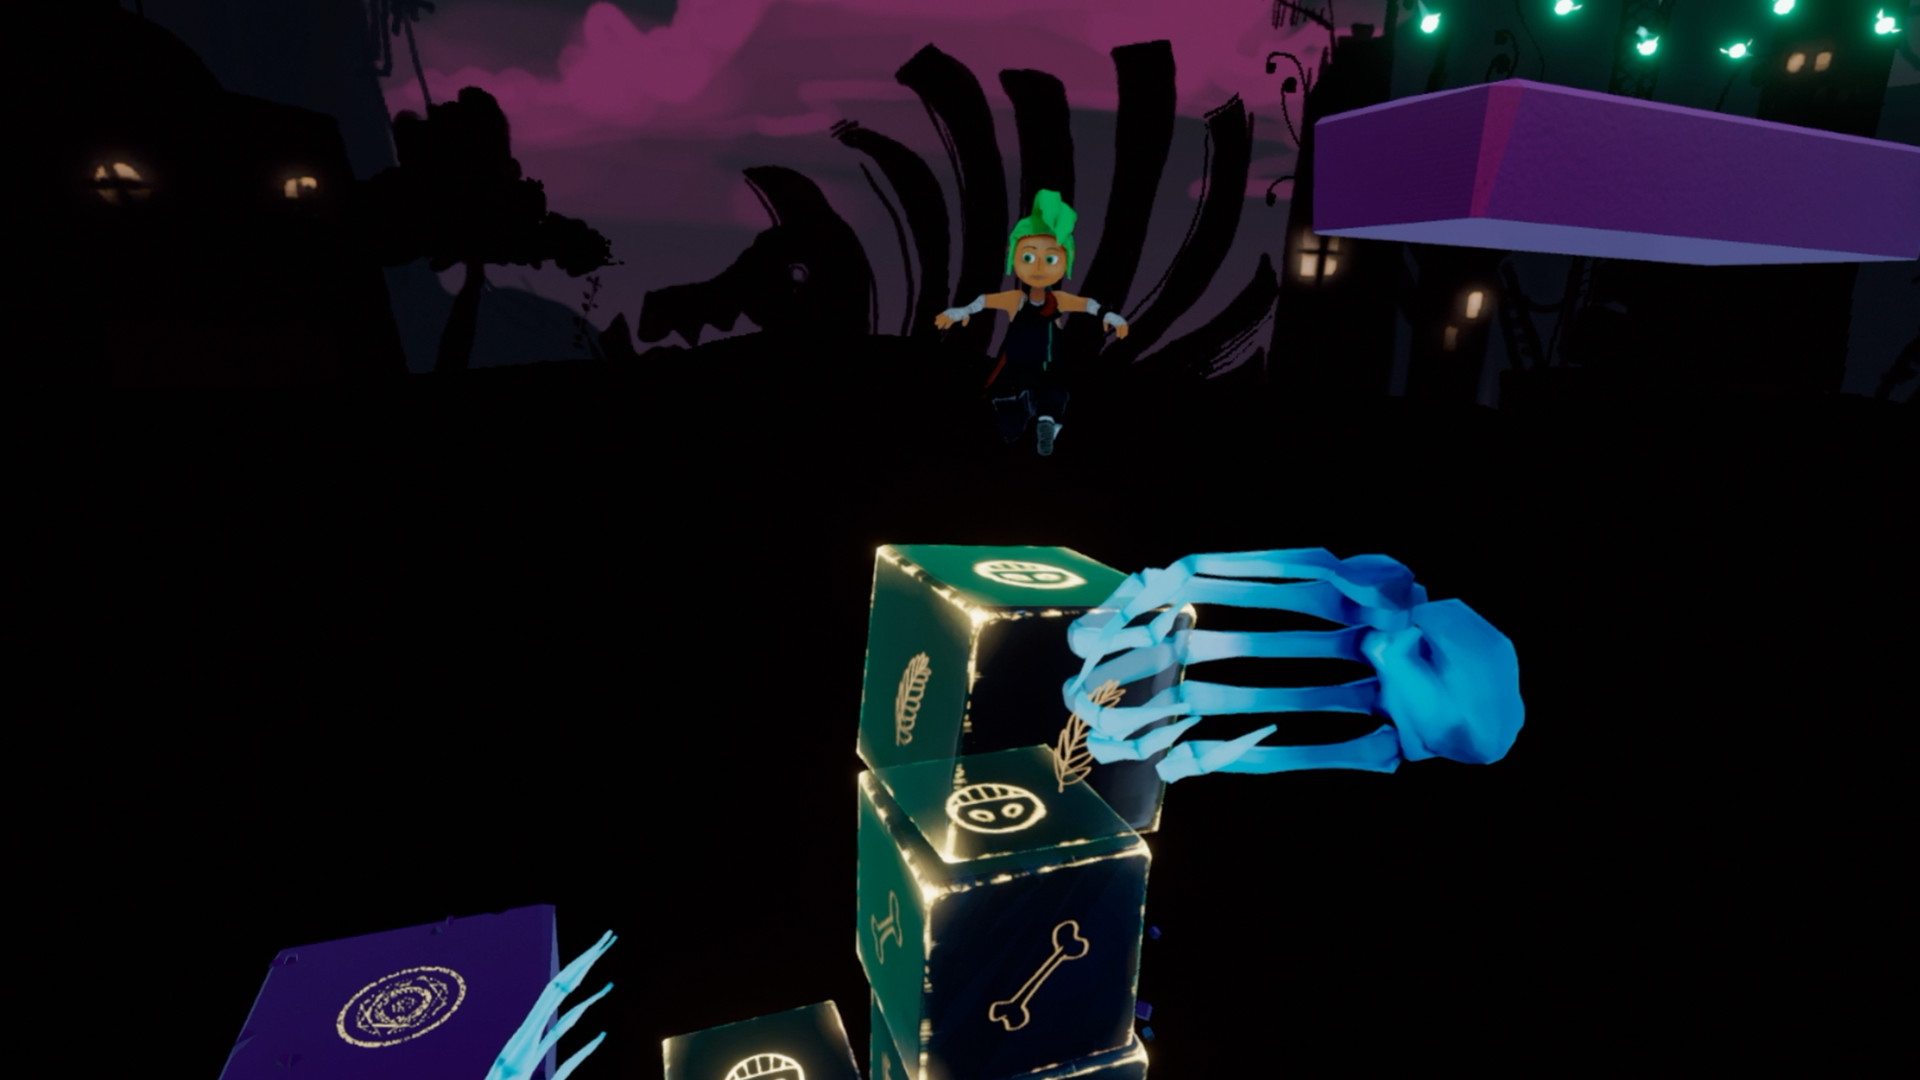 Carly-and-the-Reaperman-Oculus-Rift-HTC-Vive-Windows-VR